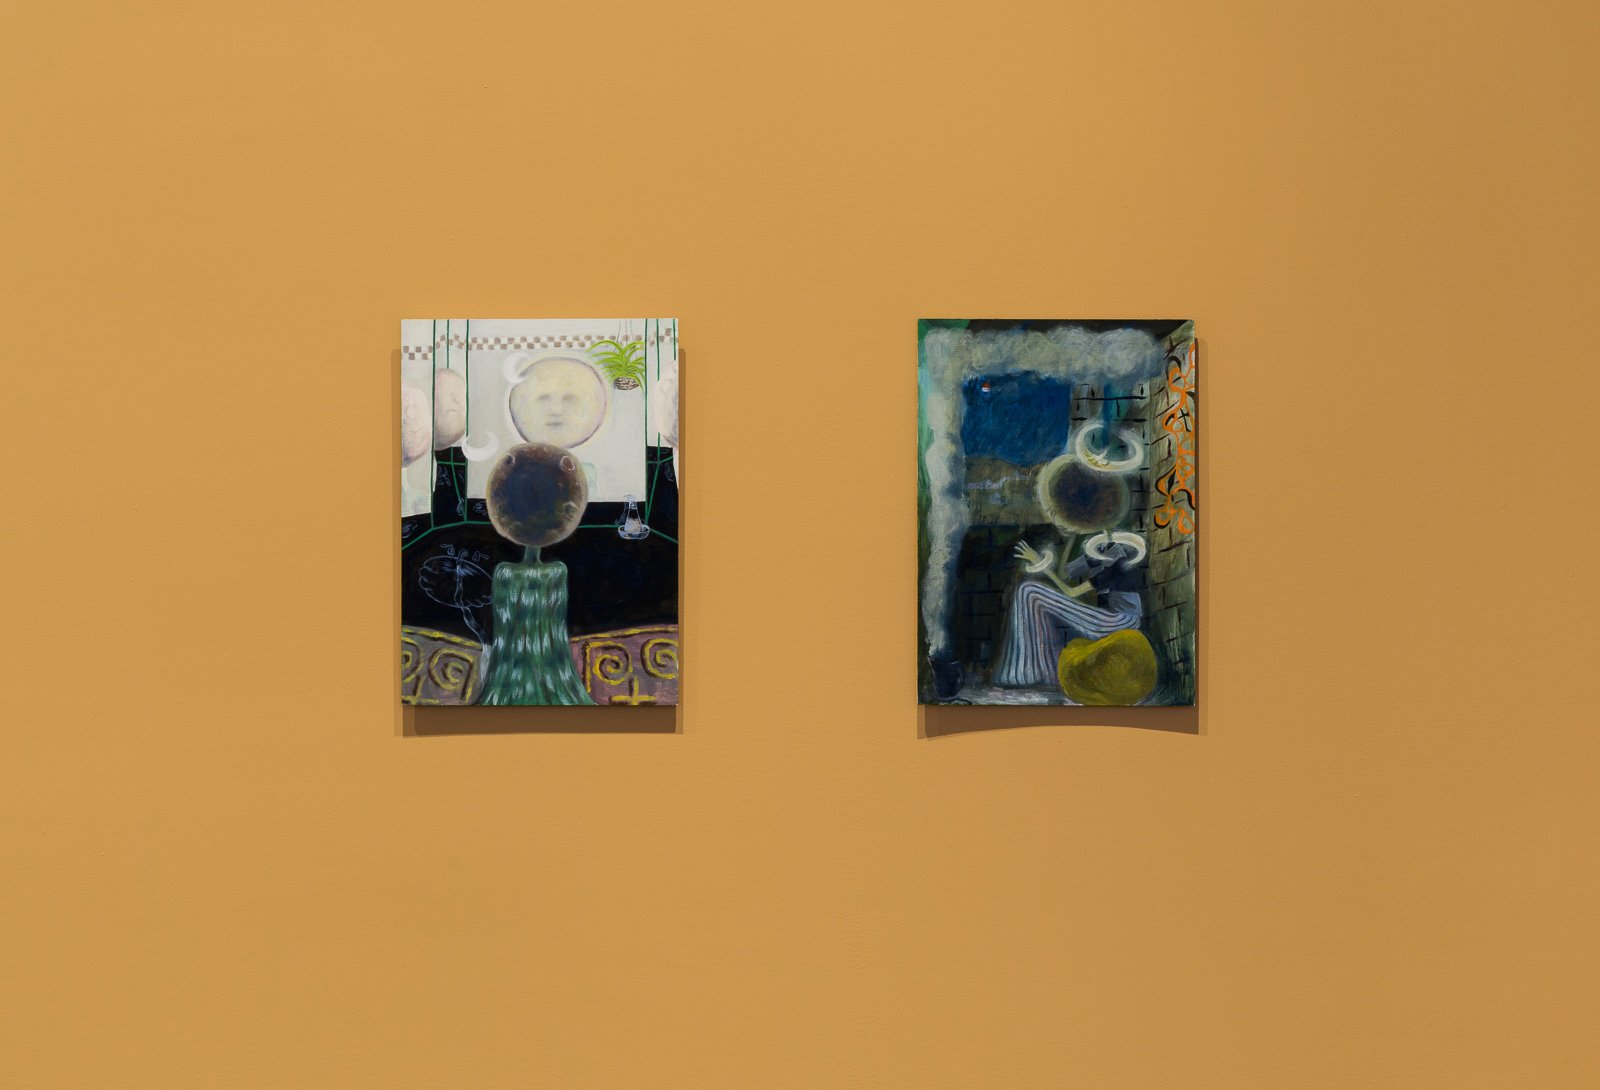  Left: Alison Yip,  Most of the Story,  oil on wood, 2019. Courtesy of the artist and Monte Clark Gallery.   Right: Alison Yip,  The Residency , oil on wood, 2019. Courtesy of the artist and Monte Clark Gallery.   